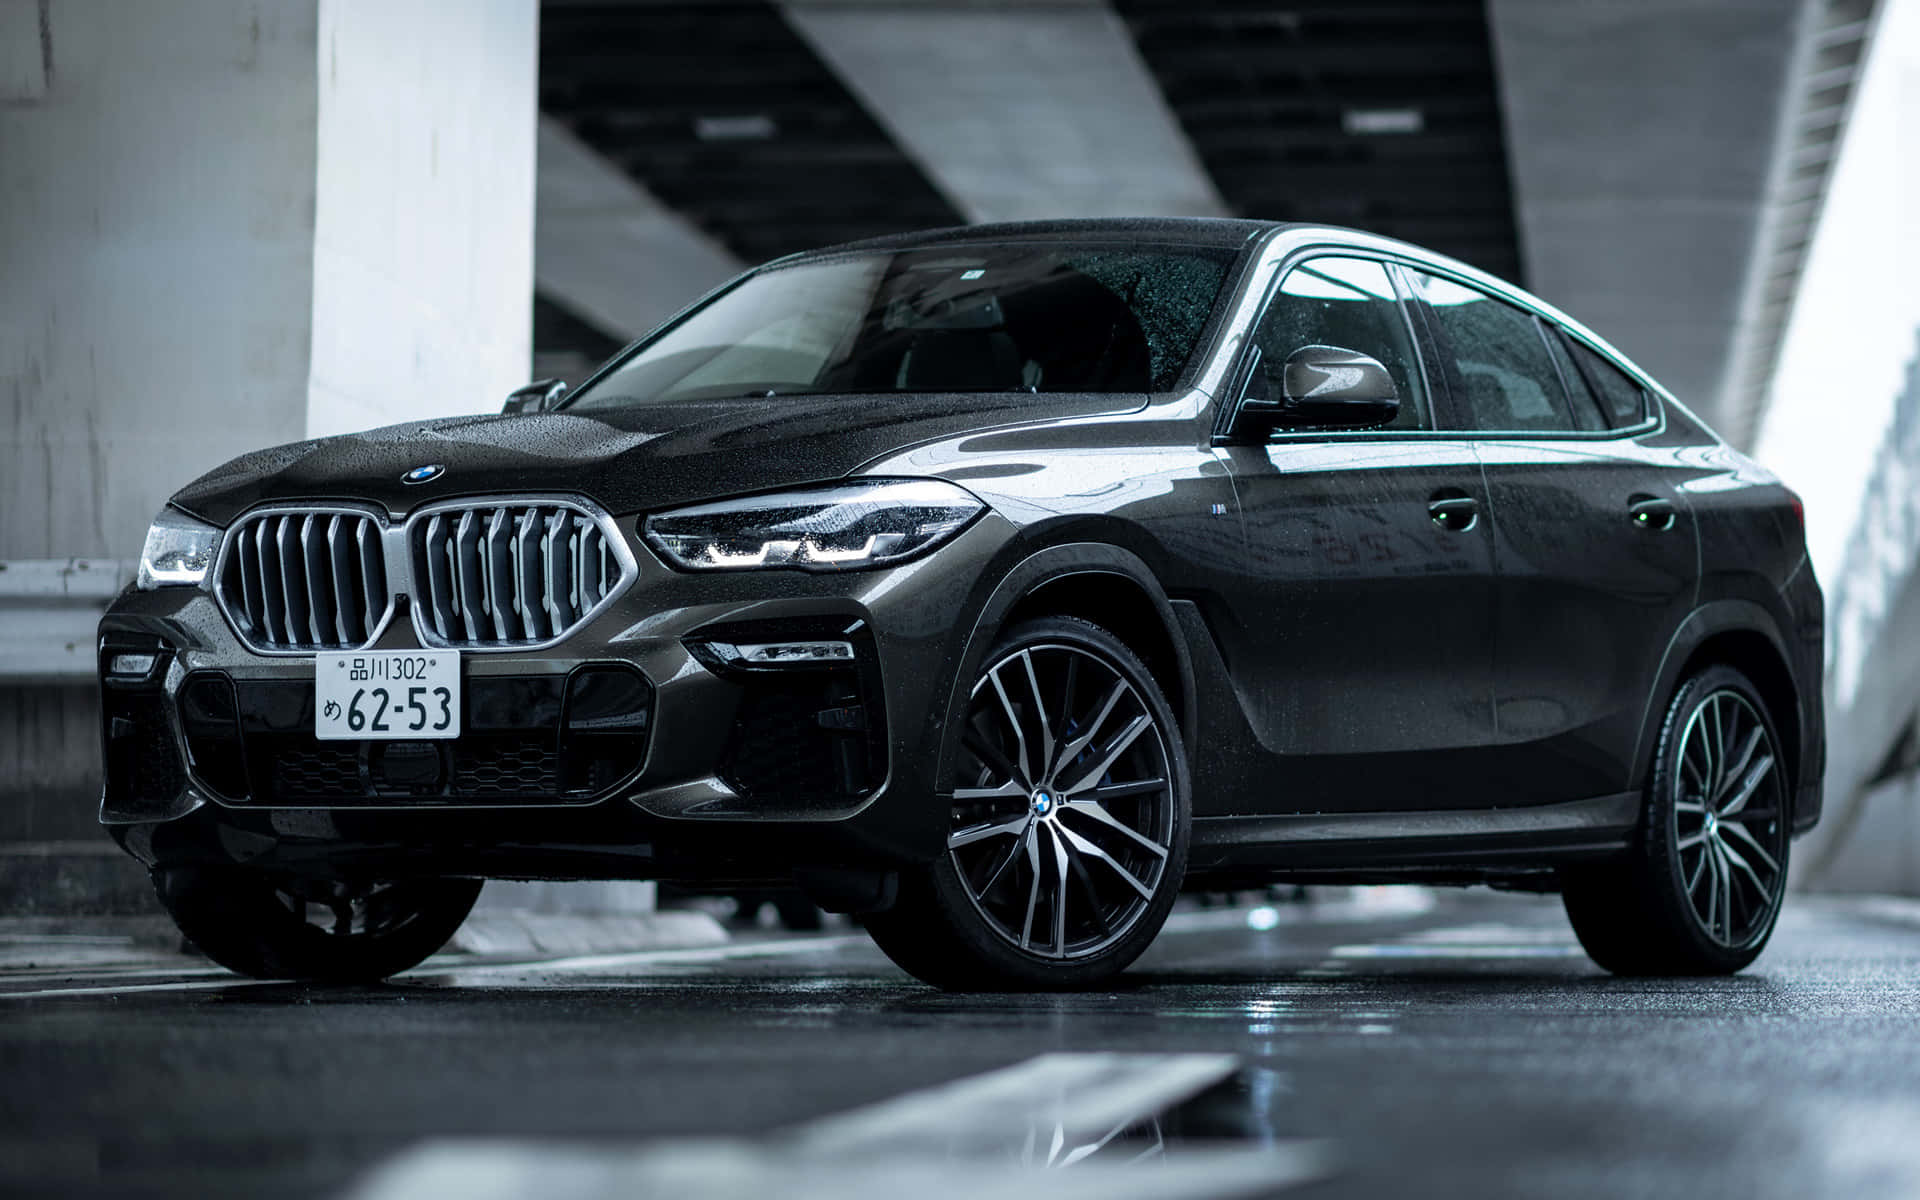 "The power and luxury of the BMW X6 M"